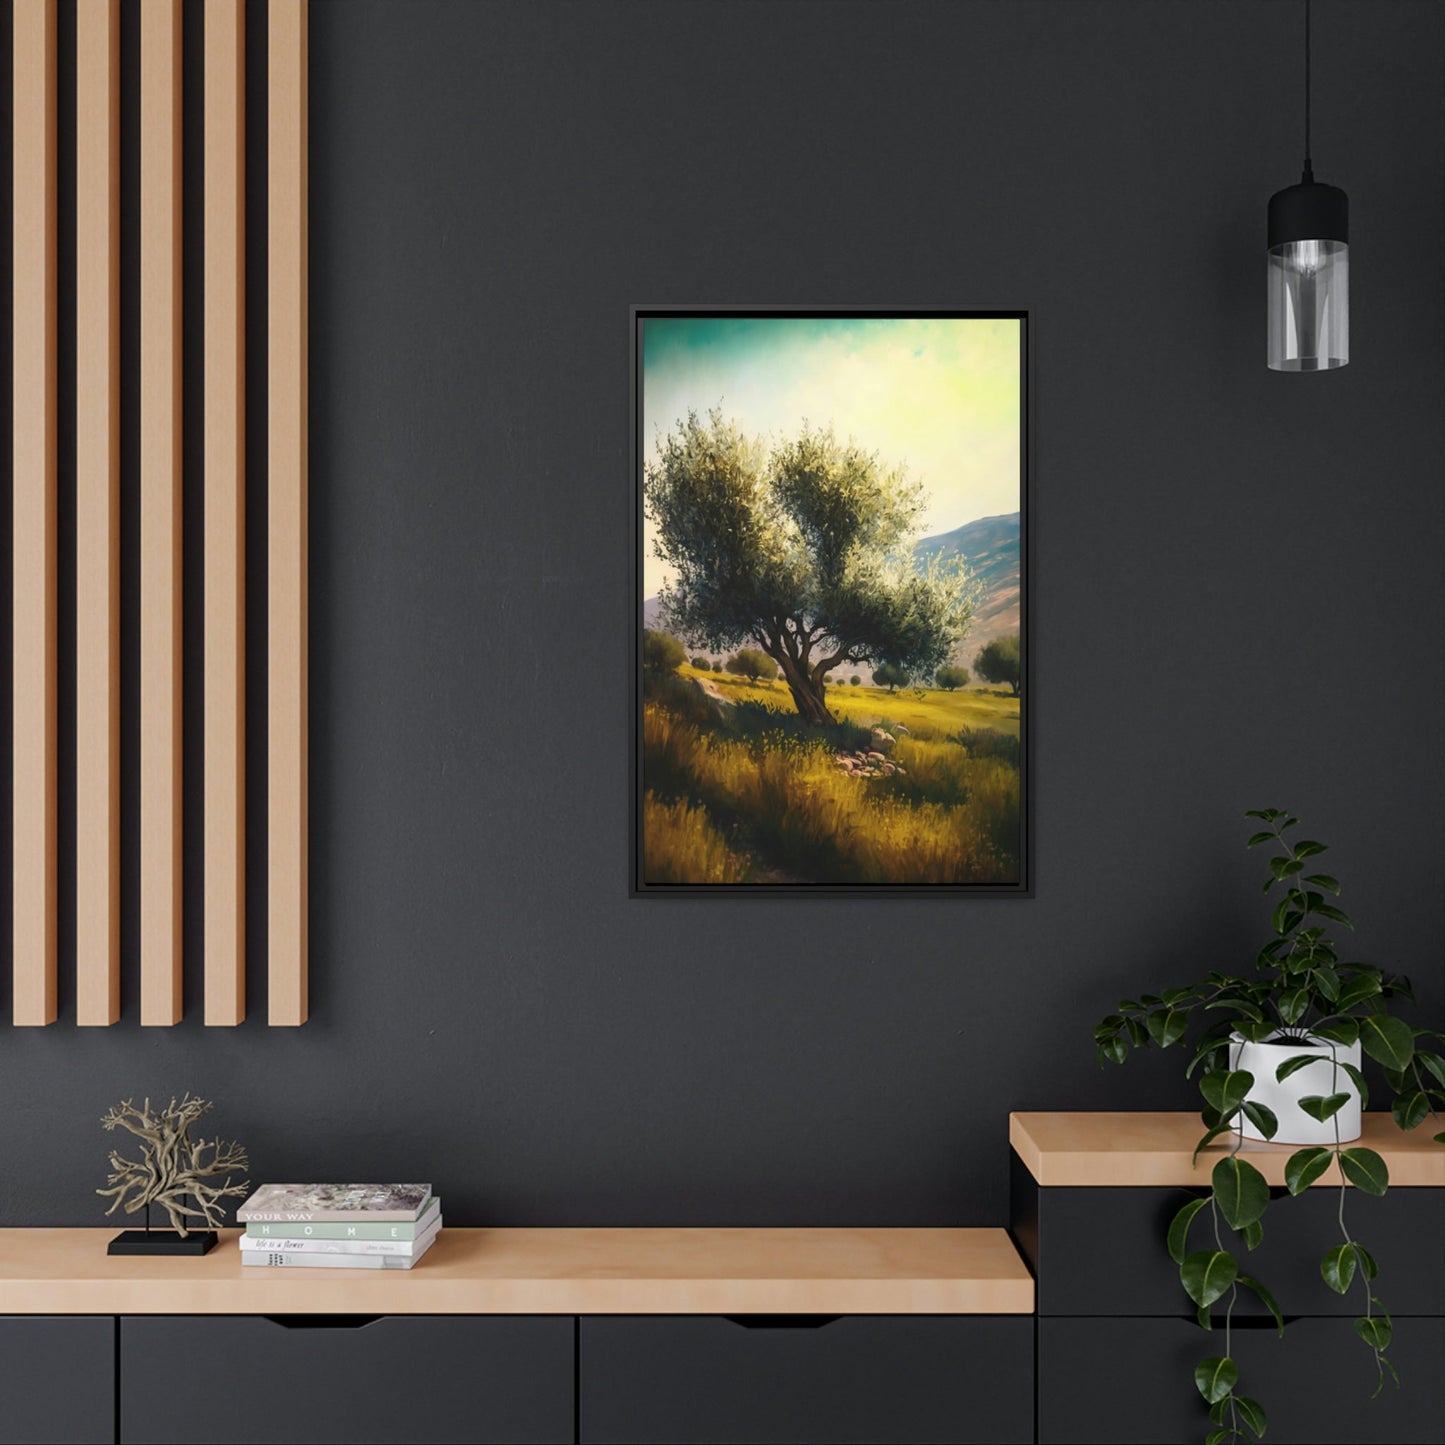 Shades of Green: A Tranquil and Serene Portrait of Olive Trees in Nature's Embrace